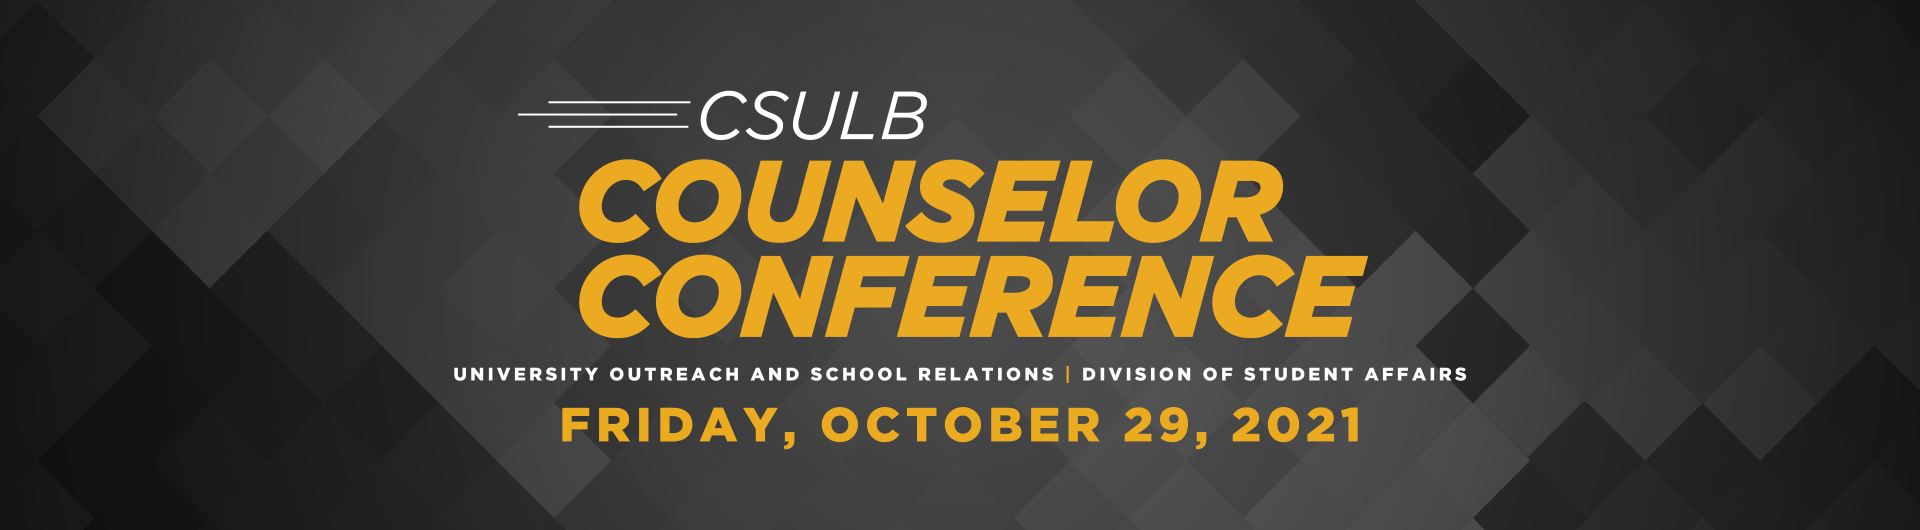 Counselor Conference